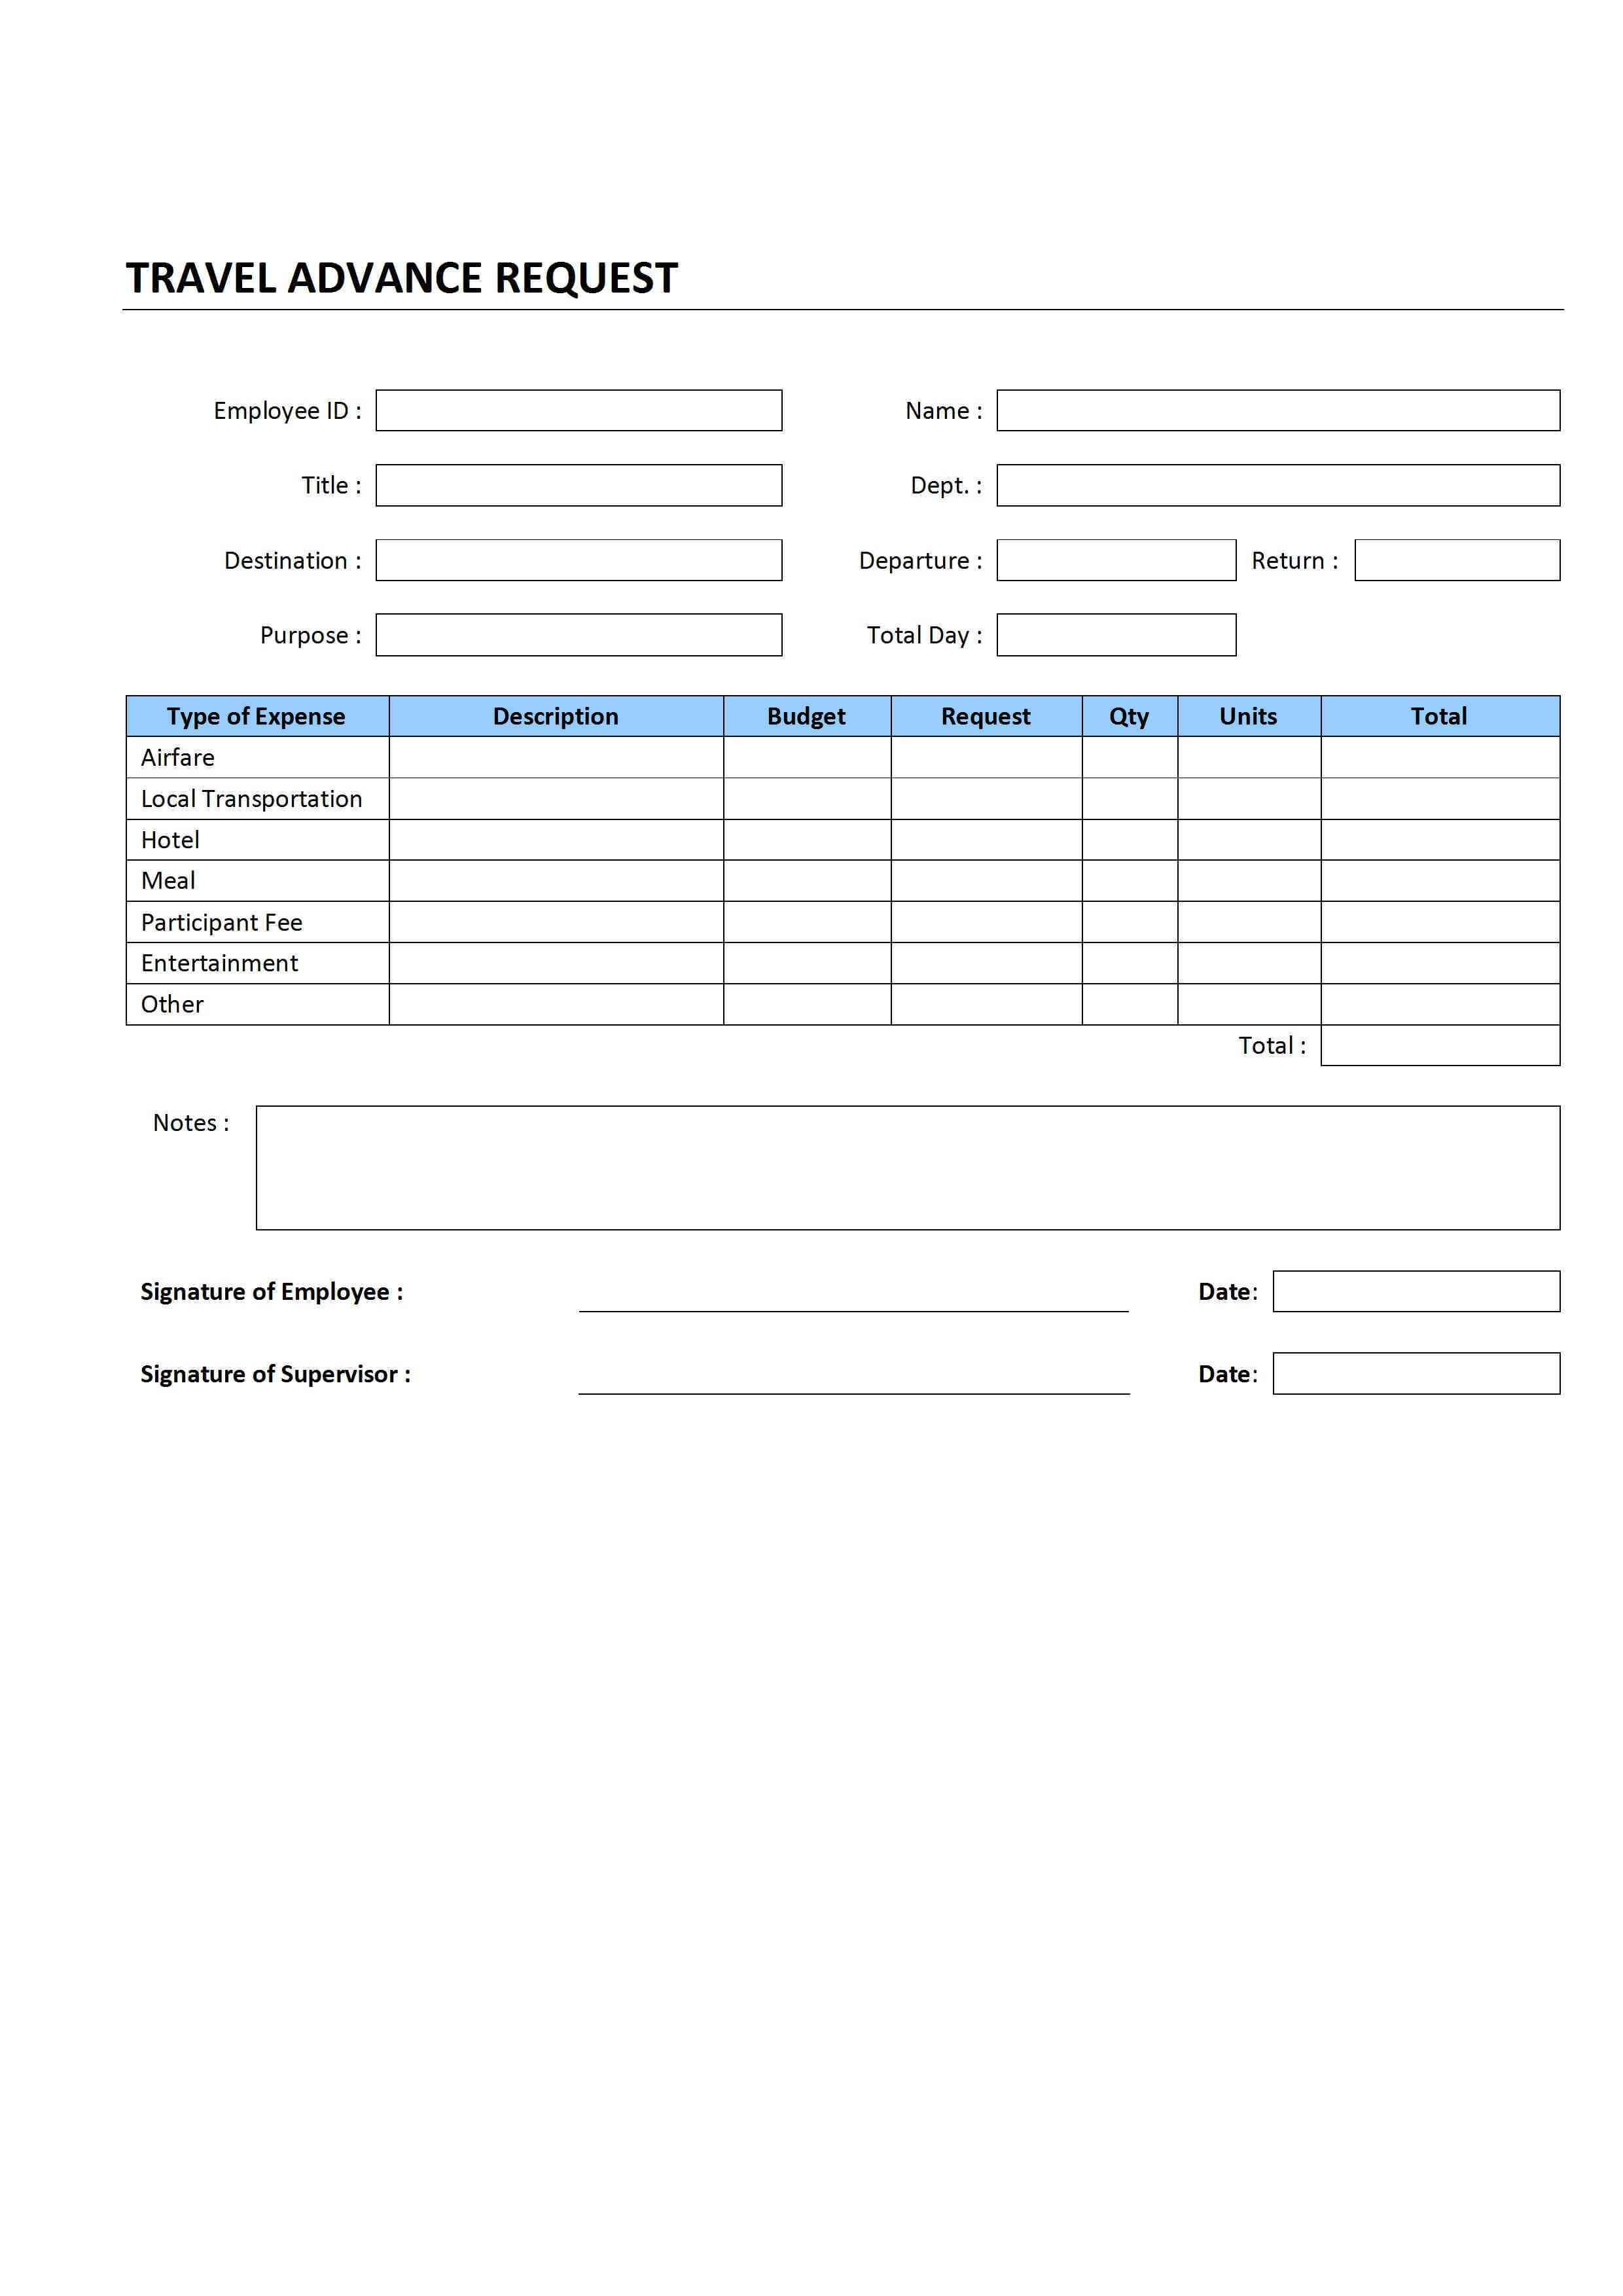 Travel Advance Request For Travel Request Form Template Word